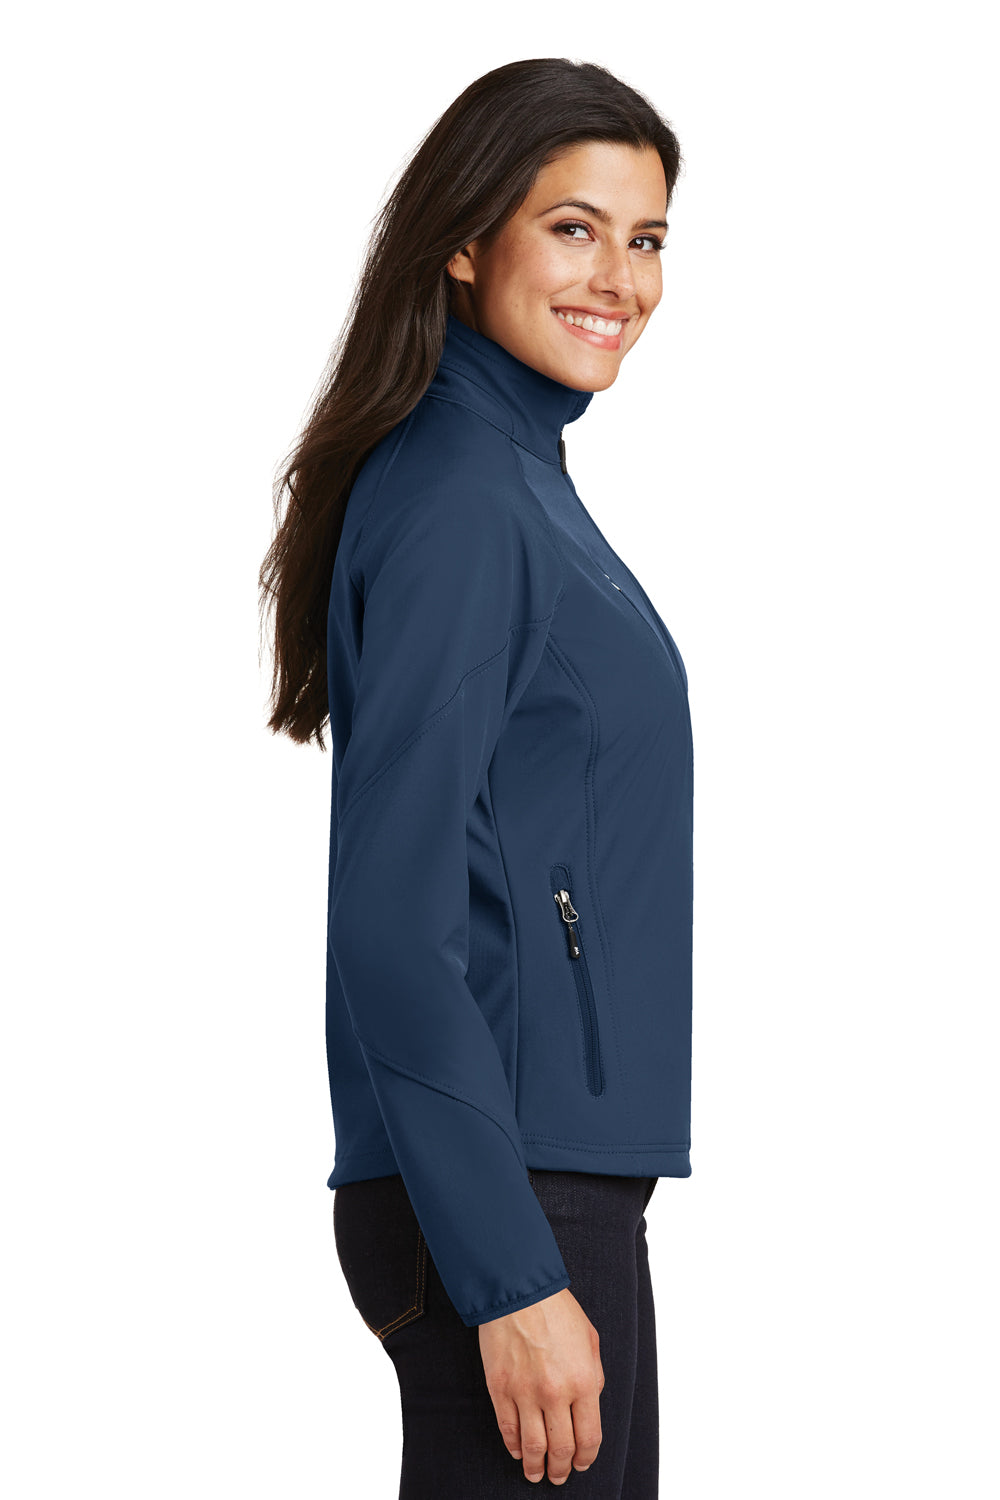 Port Authority L705 Womens Wind & Water Resistant Full Zip Jacket Insignia Blue Side